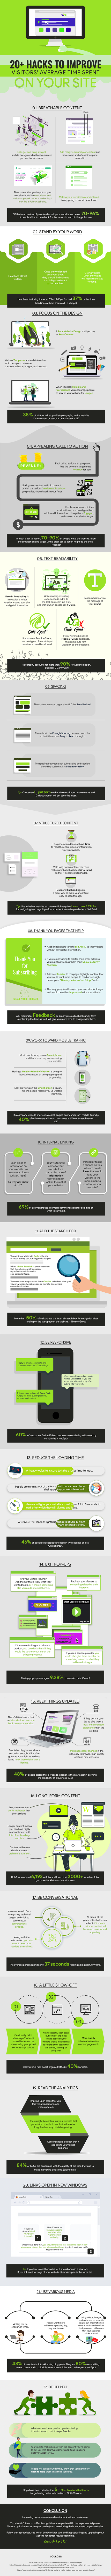 20+ Methods to Make Your Visitors Stay on the Website Longer #infographic